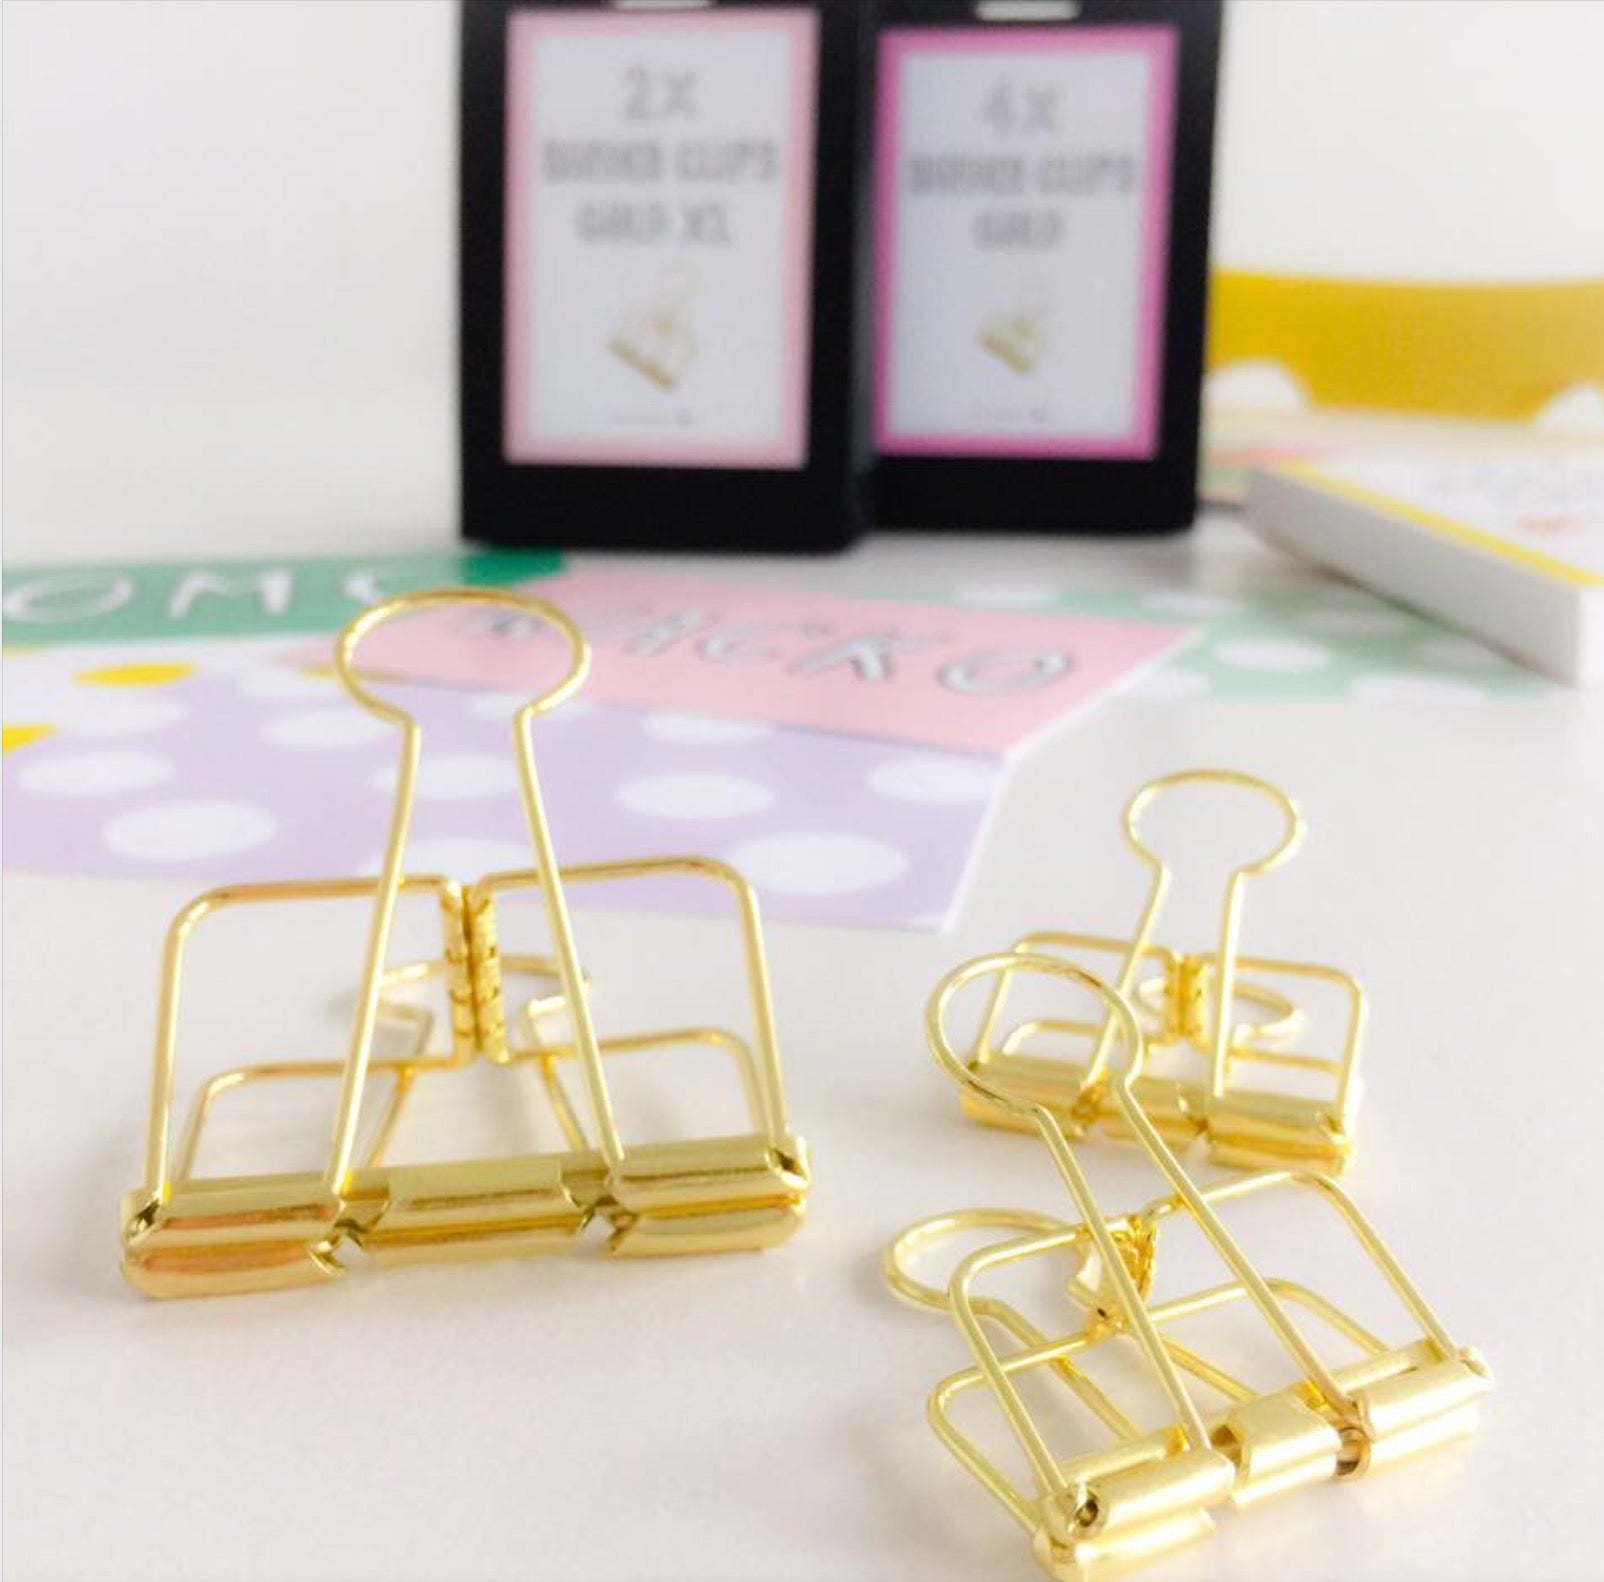 1 large and 2 small binder clips in gold color